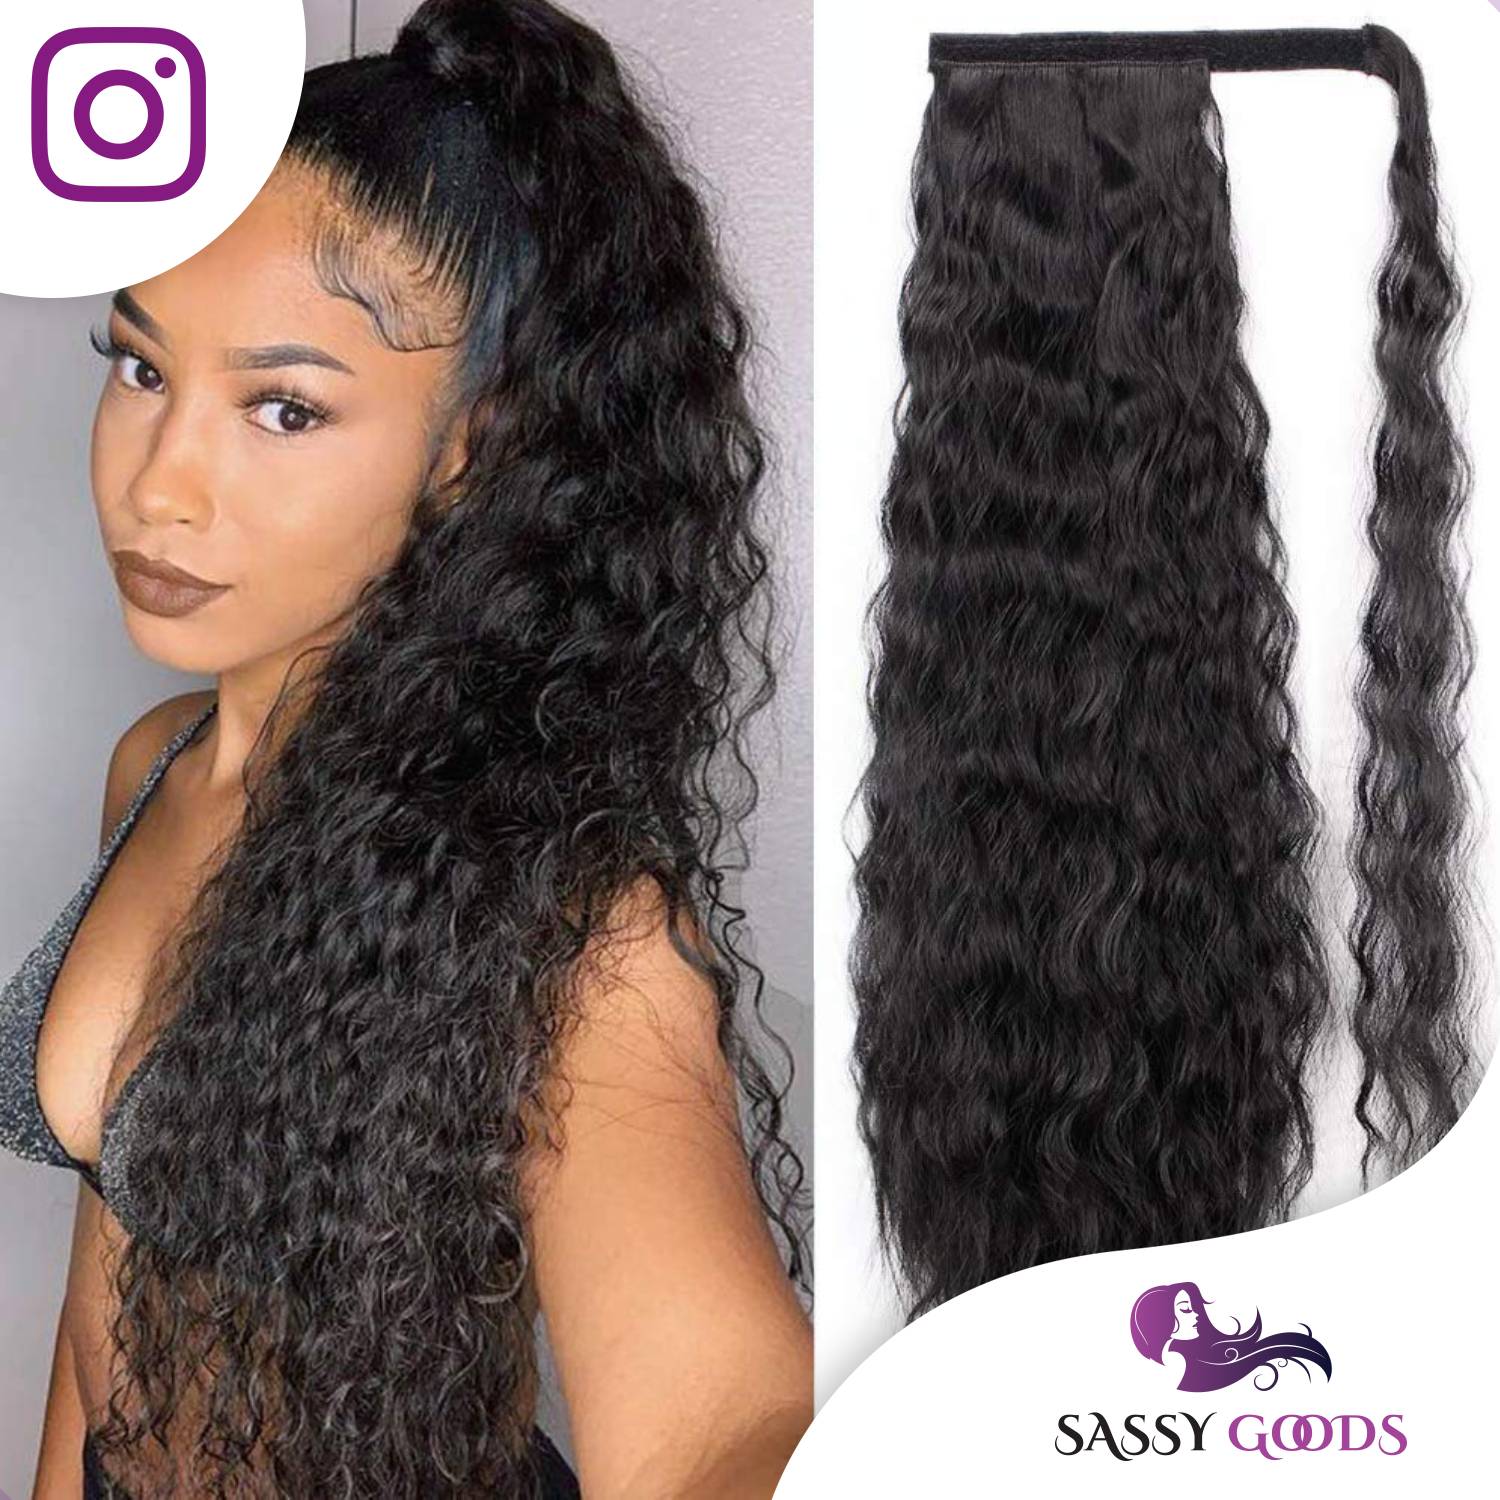 PRE-ORDER Ponytail Extensions Black Long Curly Wavy - Ponytail 65 cm